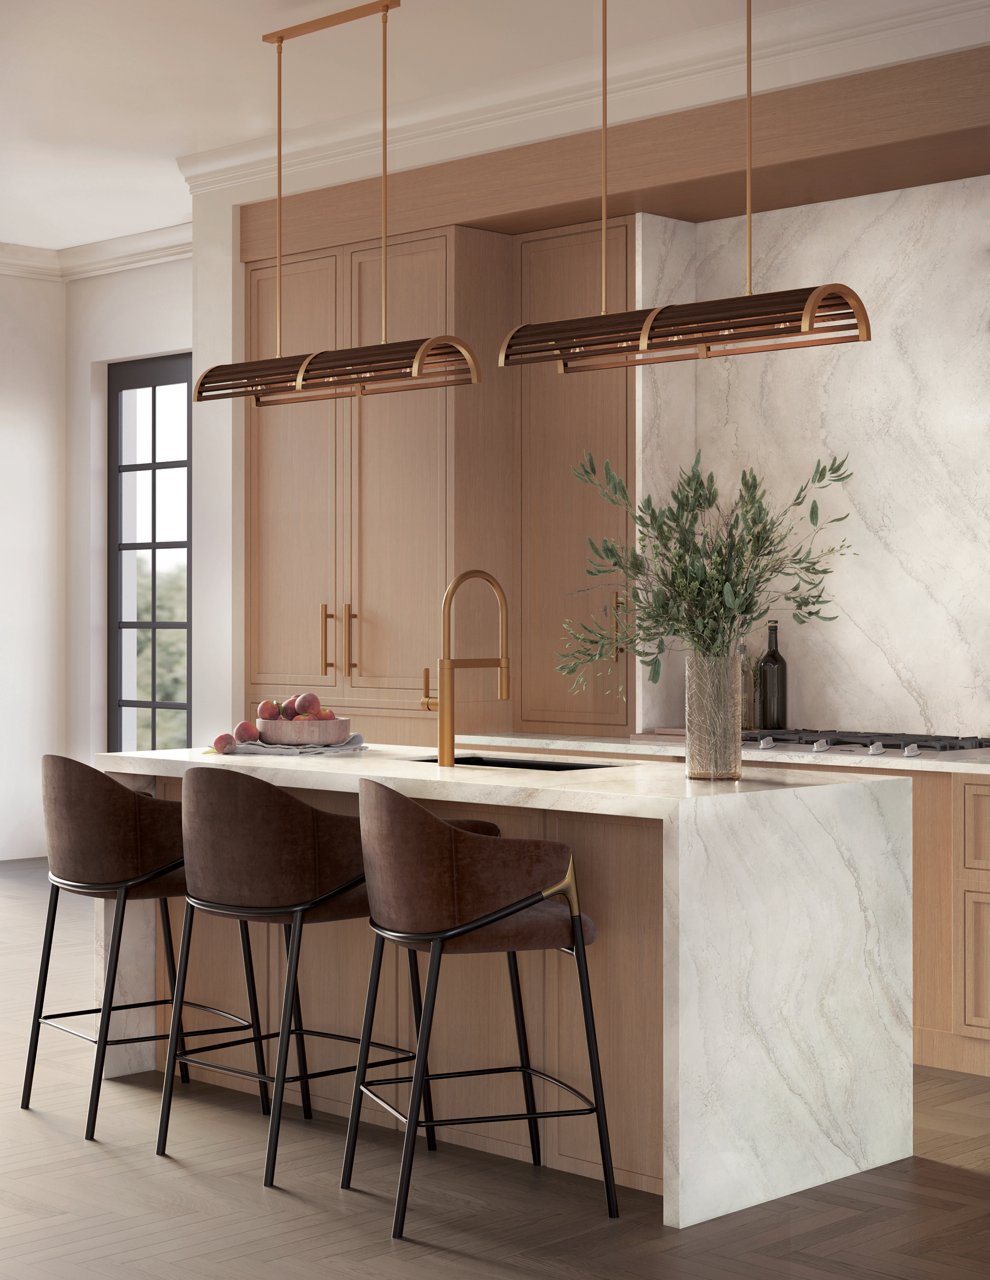 Oak kitchen with gold fixtures and Everleigh quartz waterfall countertop and backsplash